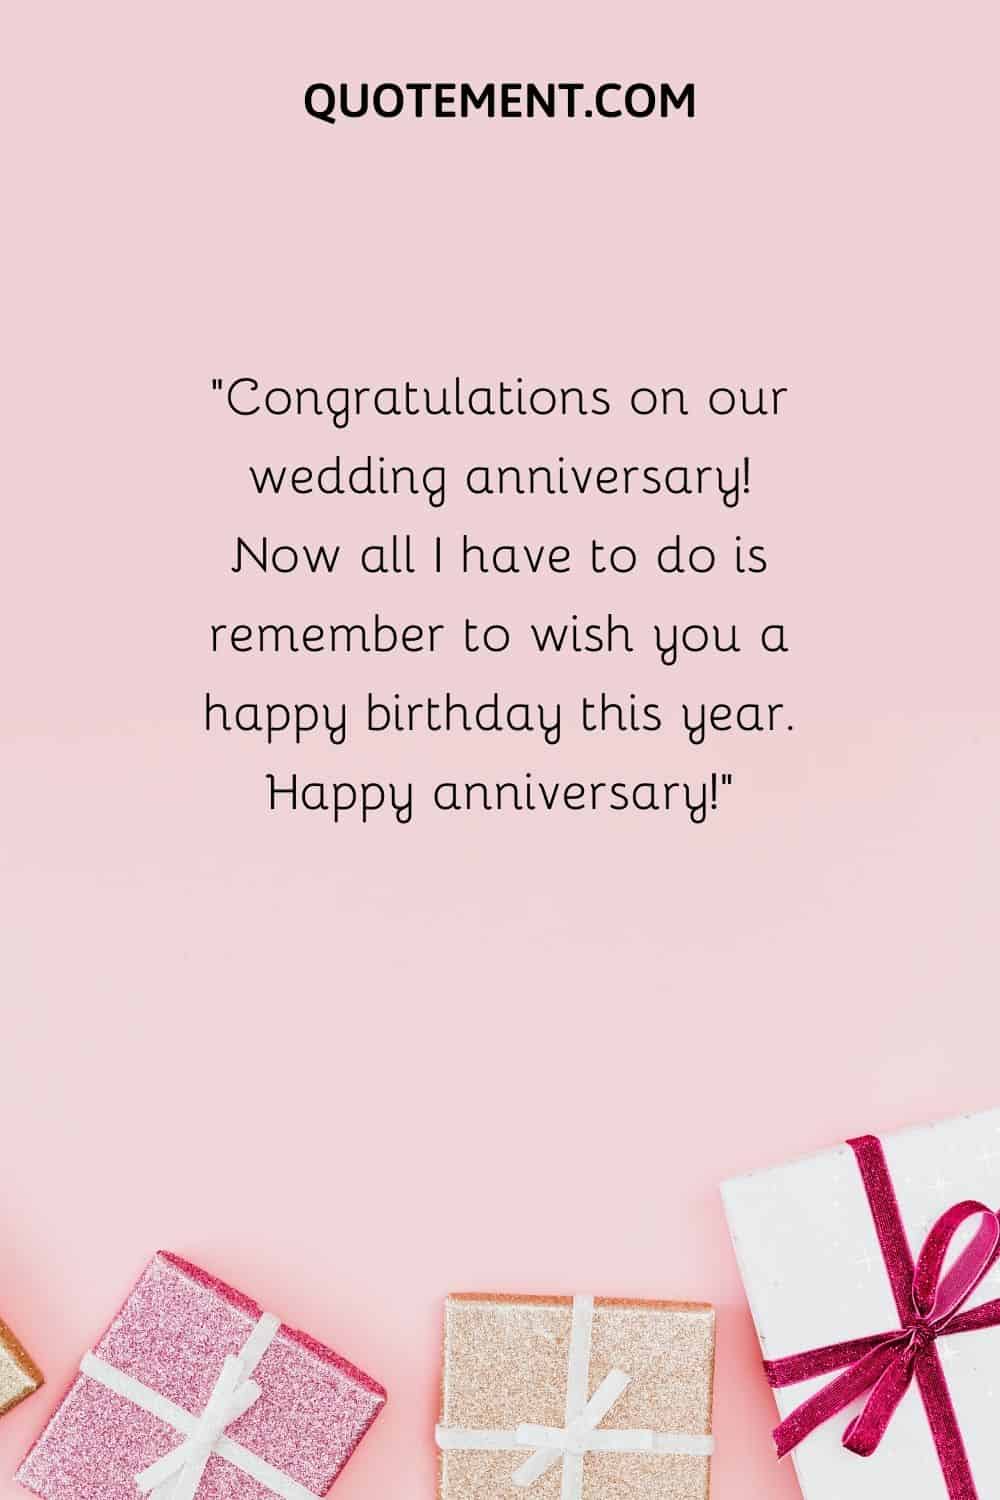 Congratulations on our wedding anniversary!